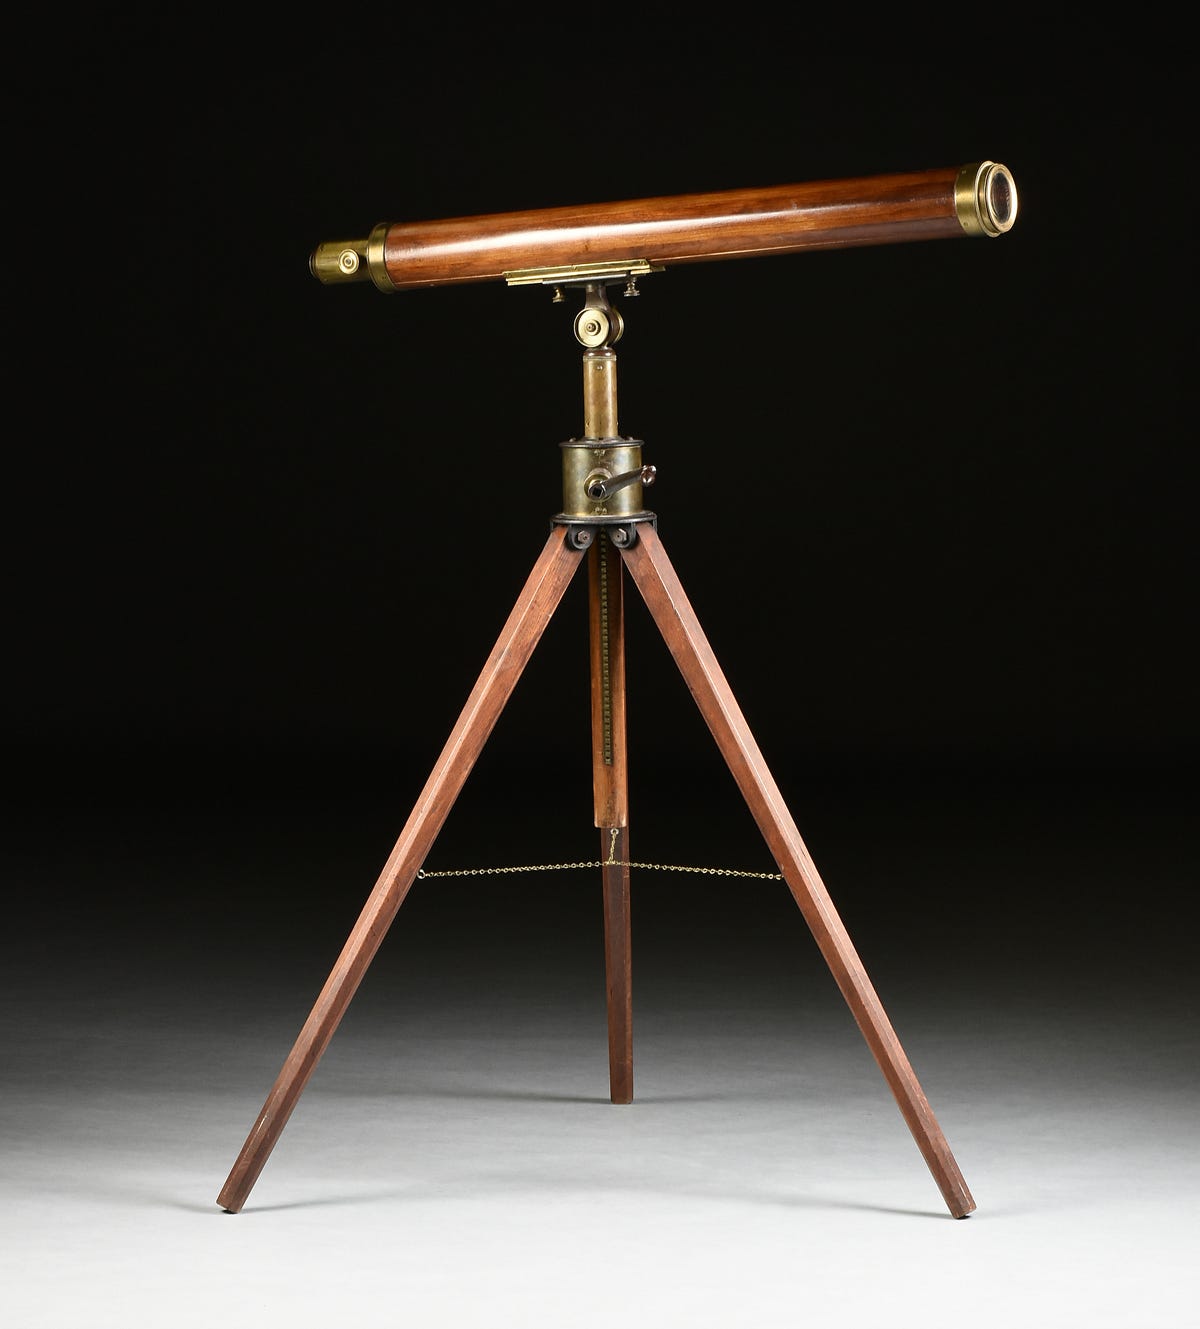 Lot - AN ANTIQUE AMERICAN BRASS MOUNTED WOOD TELESCOPE WITH TRIPOD STAND,  BY JOHN R. CHAMPLIN, NEW HAMPSHIRE, CIRCA 1880,